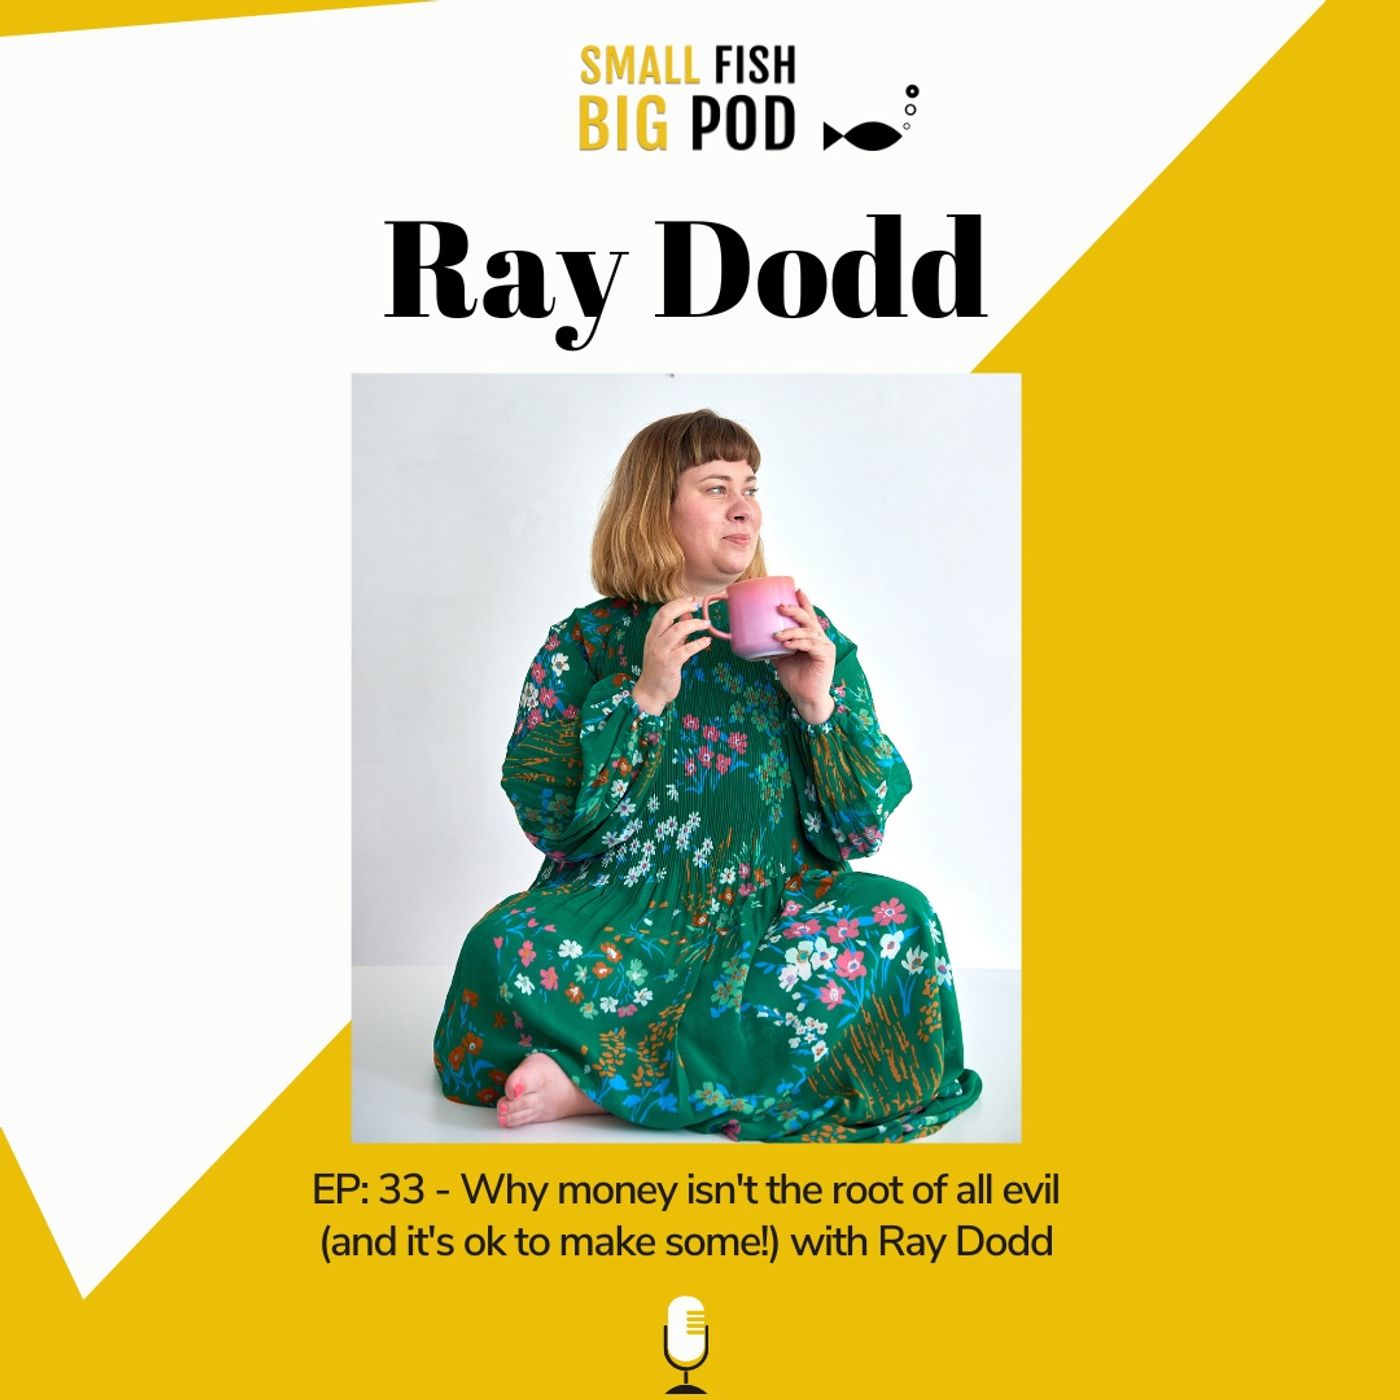 EP 33: Why money isn't the root of all evil (and it's ok to make some) with Ray Dodd